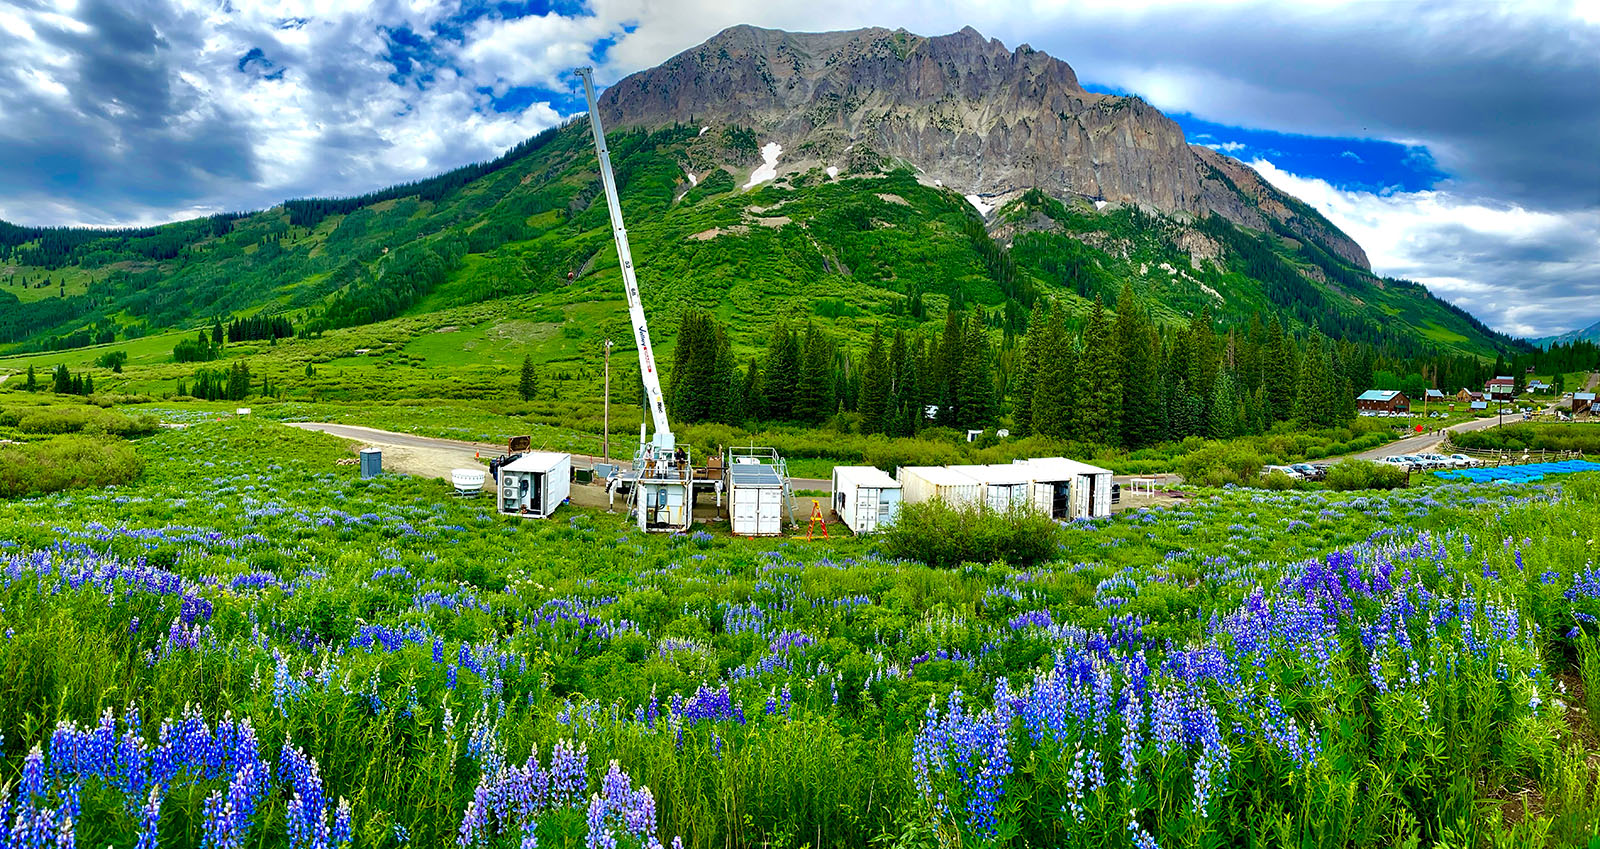 View of atmospheric measurement instruments in front of a Colorado mountain.